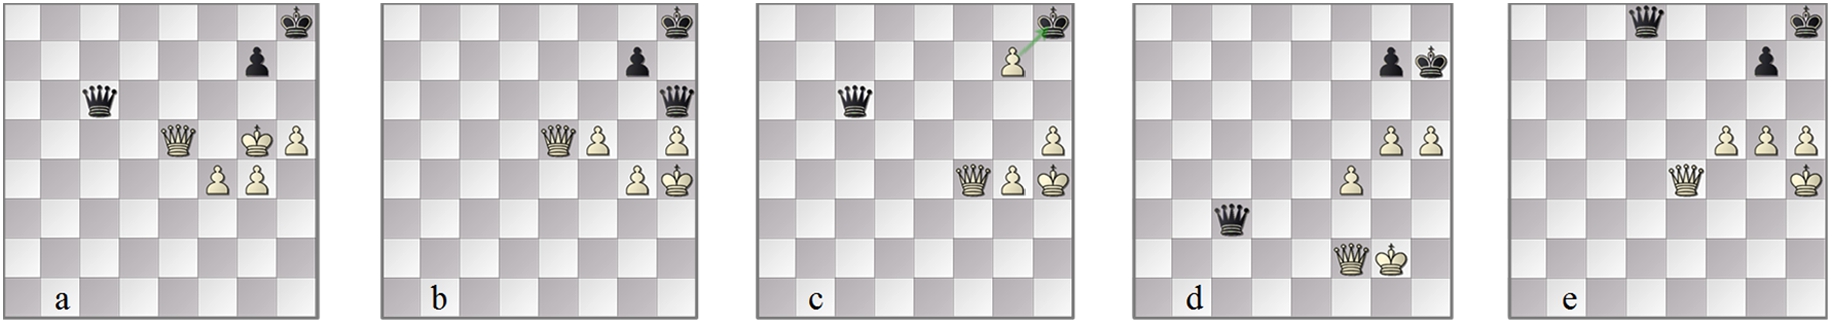 Vidit Gujrathi–L’Ami: as played, (a) ‘won’ 60w, (b) drawn 61b and (c) 7m-draw 69b. In the chosen winning line by FinalGen, (d) 66. g5 and (e) 76. f5 are wiser and later advances than the played line.